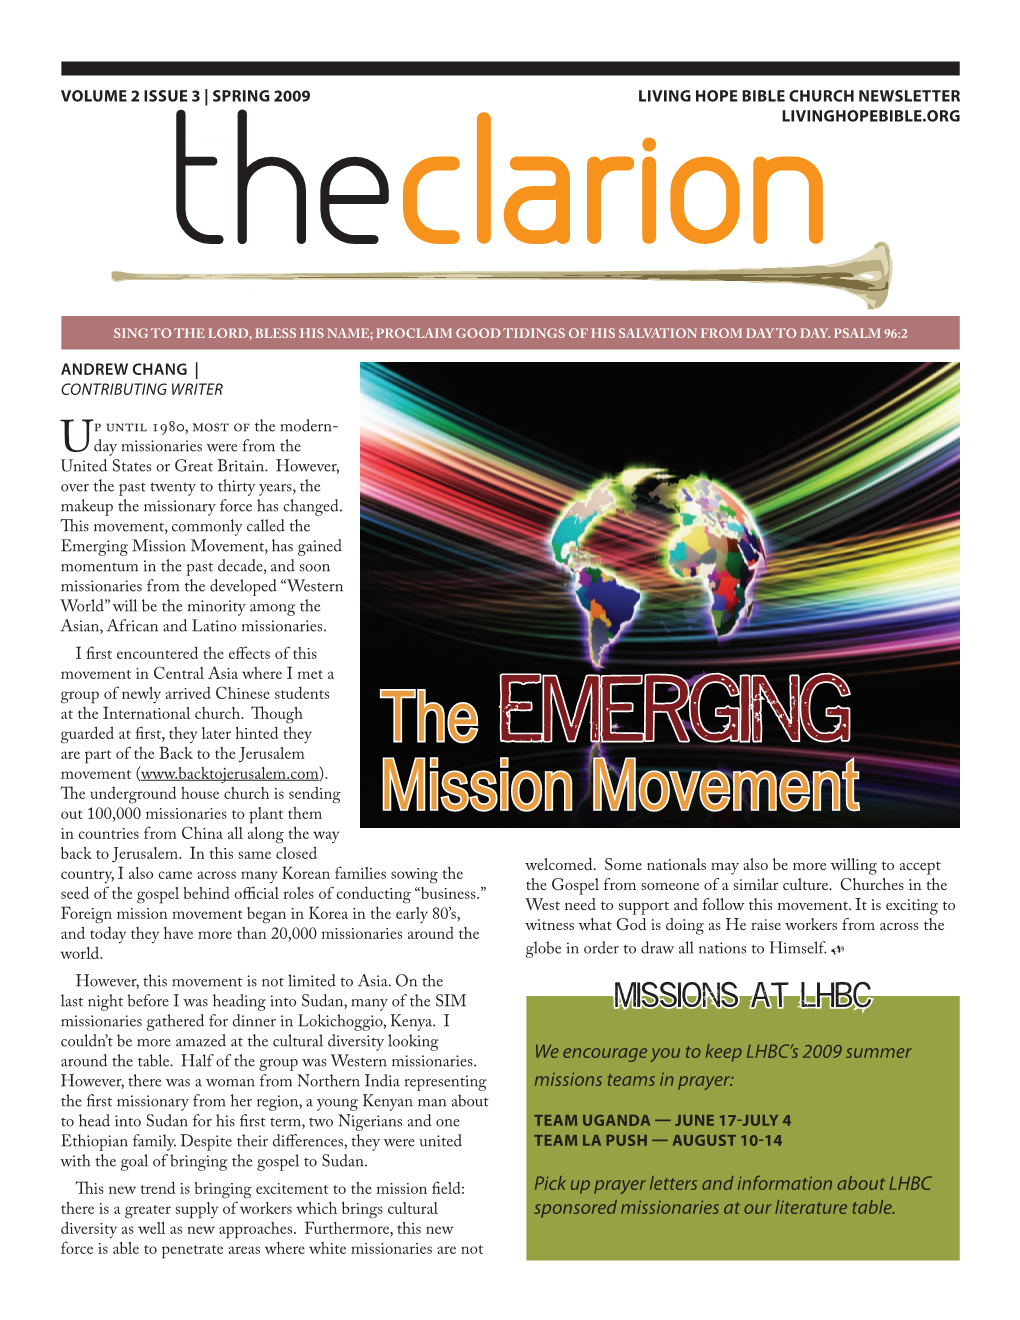 The Emerging Mission Movement